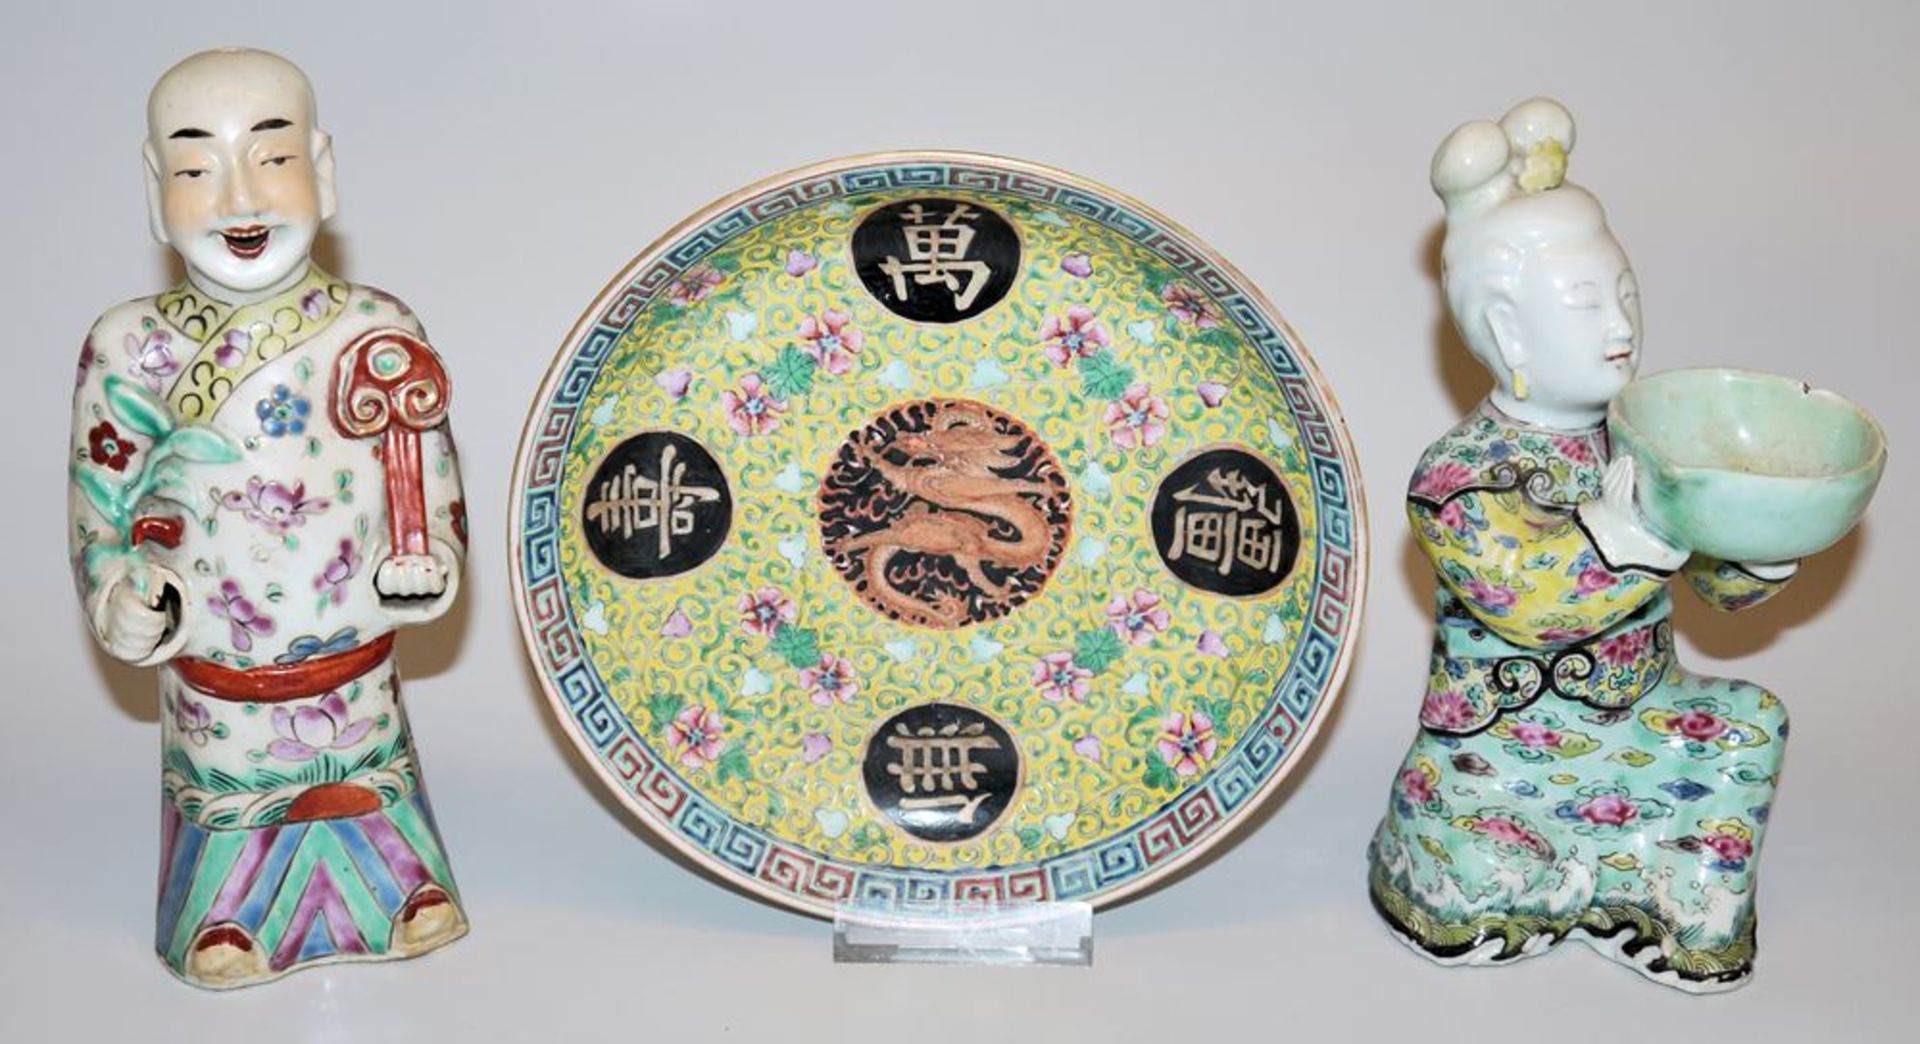 Two porcelain figures and a wish plate, China from the beginning of the 20th century.